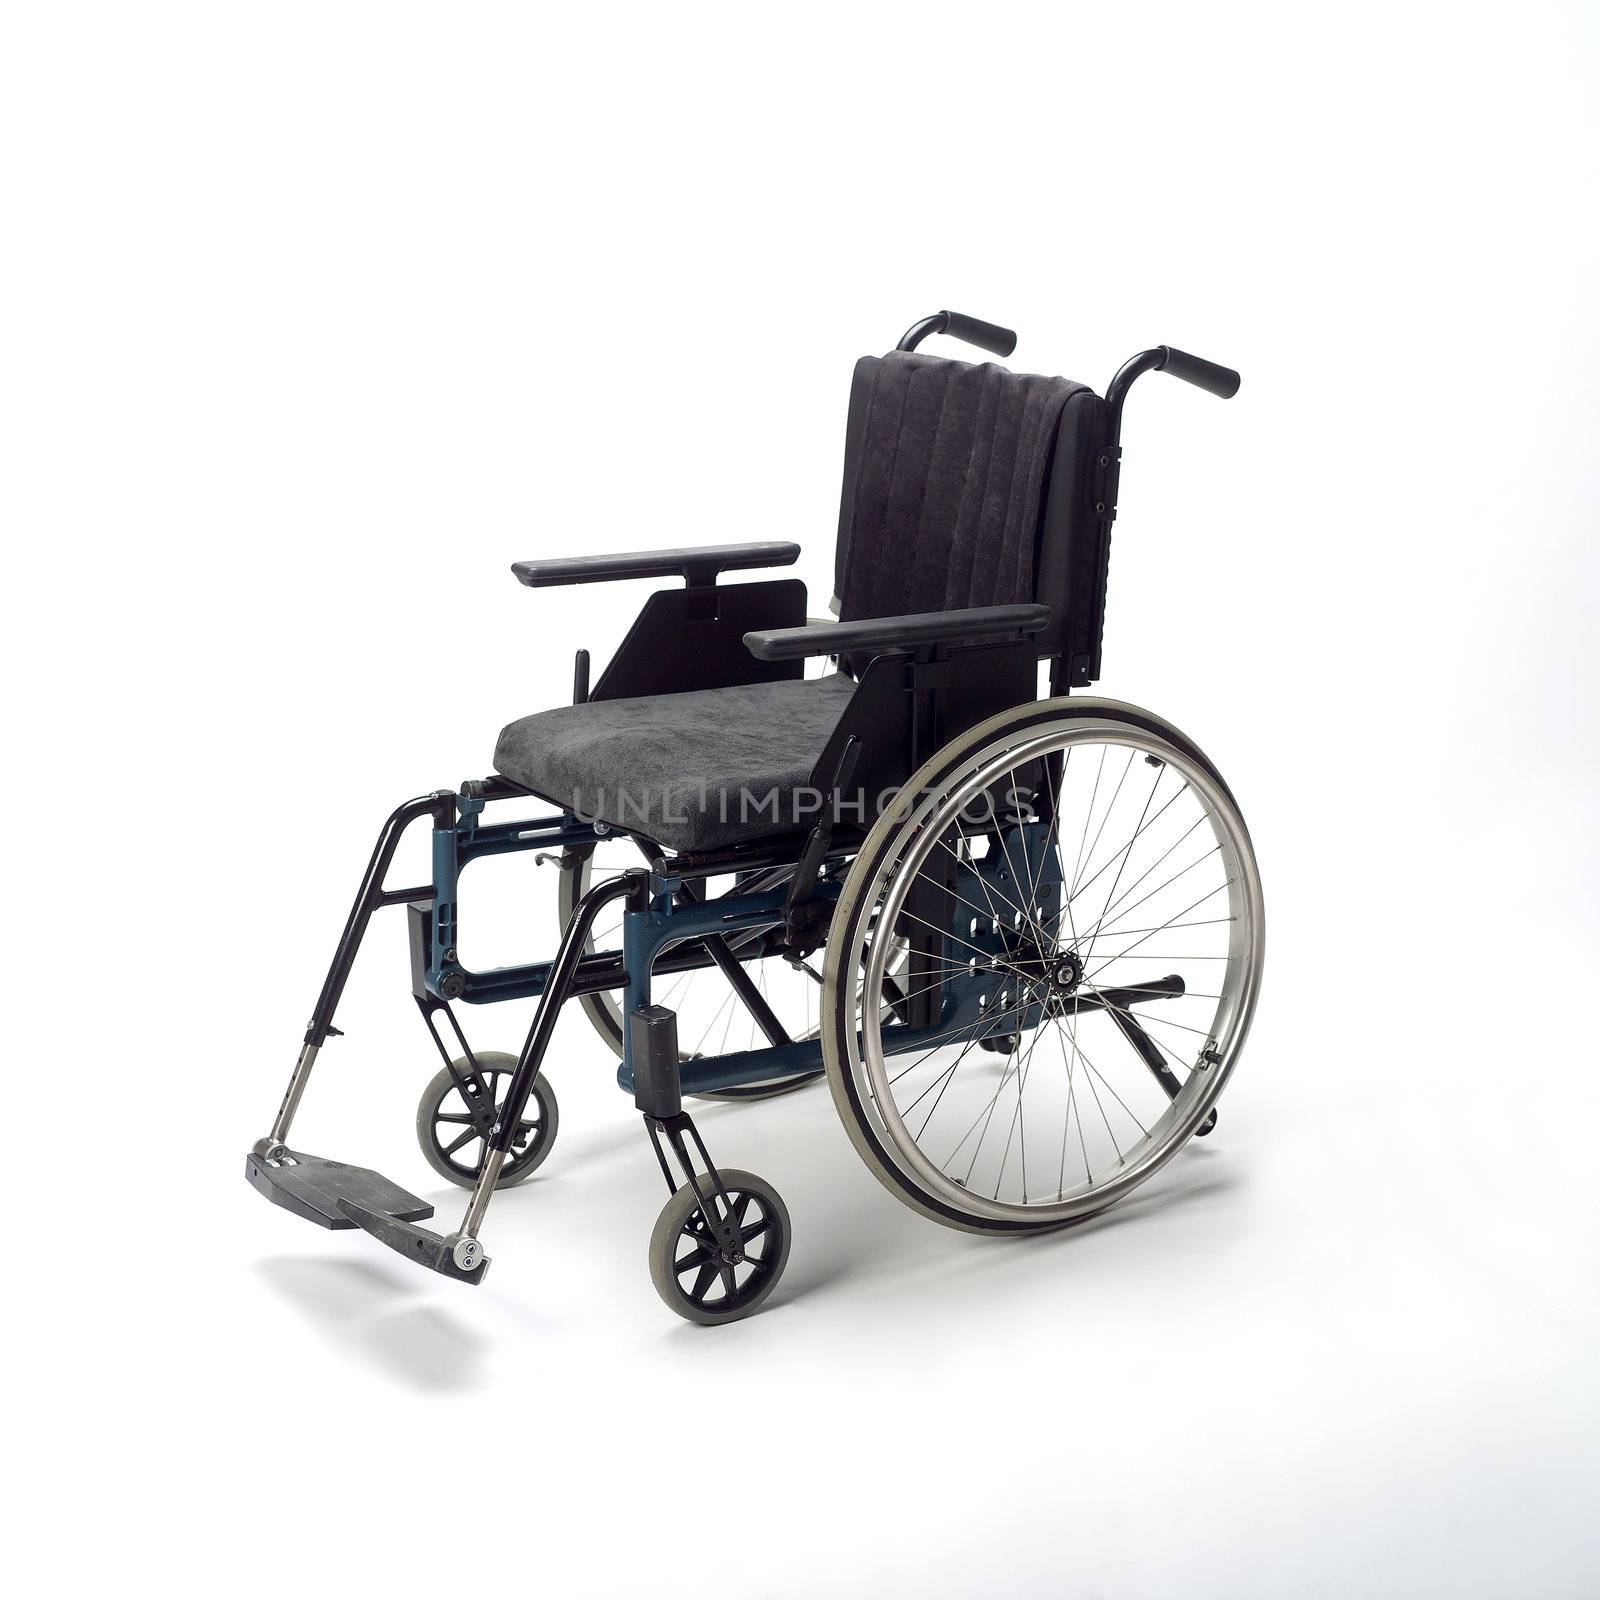 Wheel chair isolated on white background